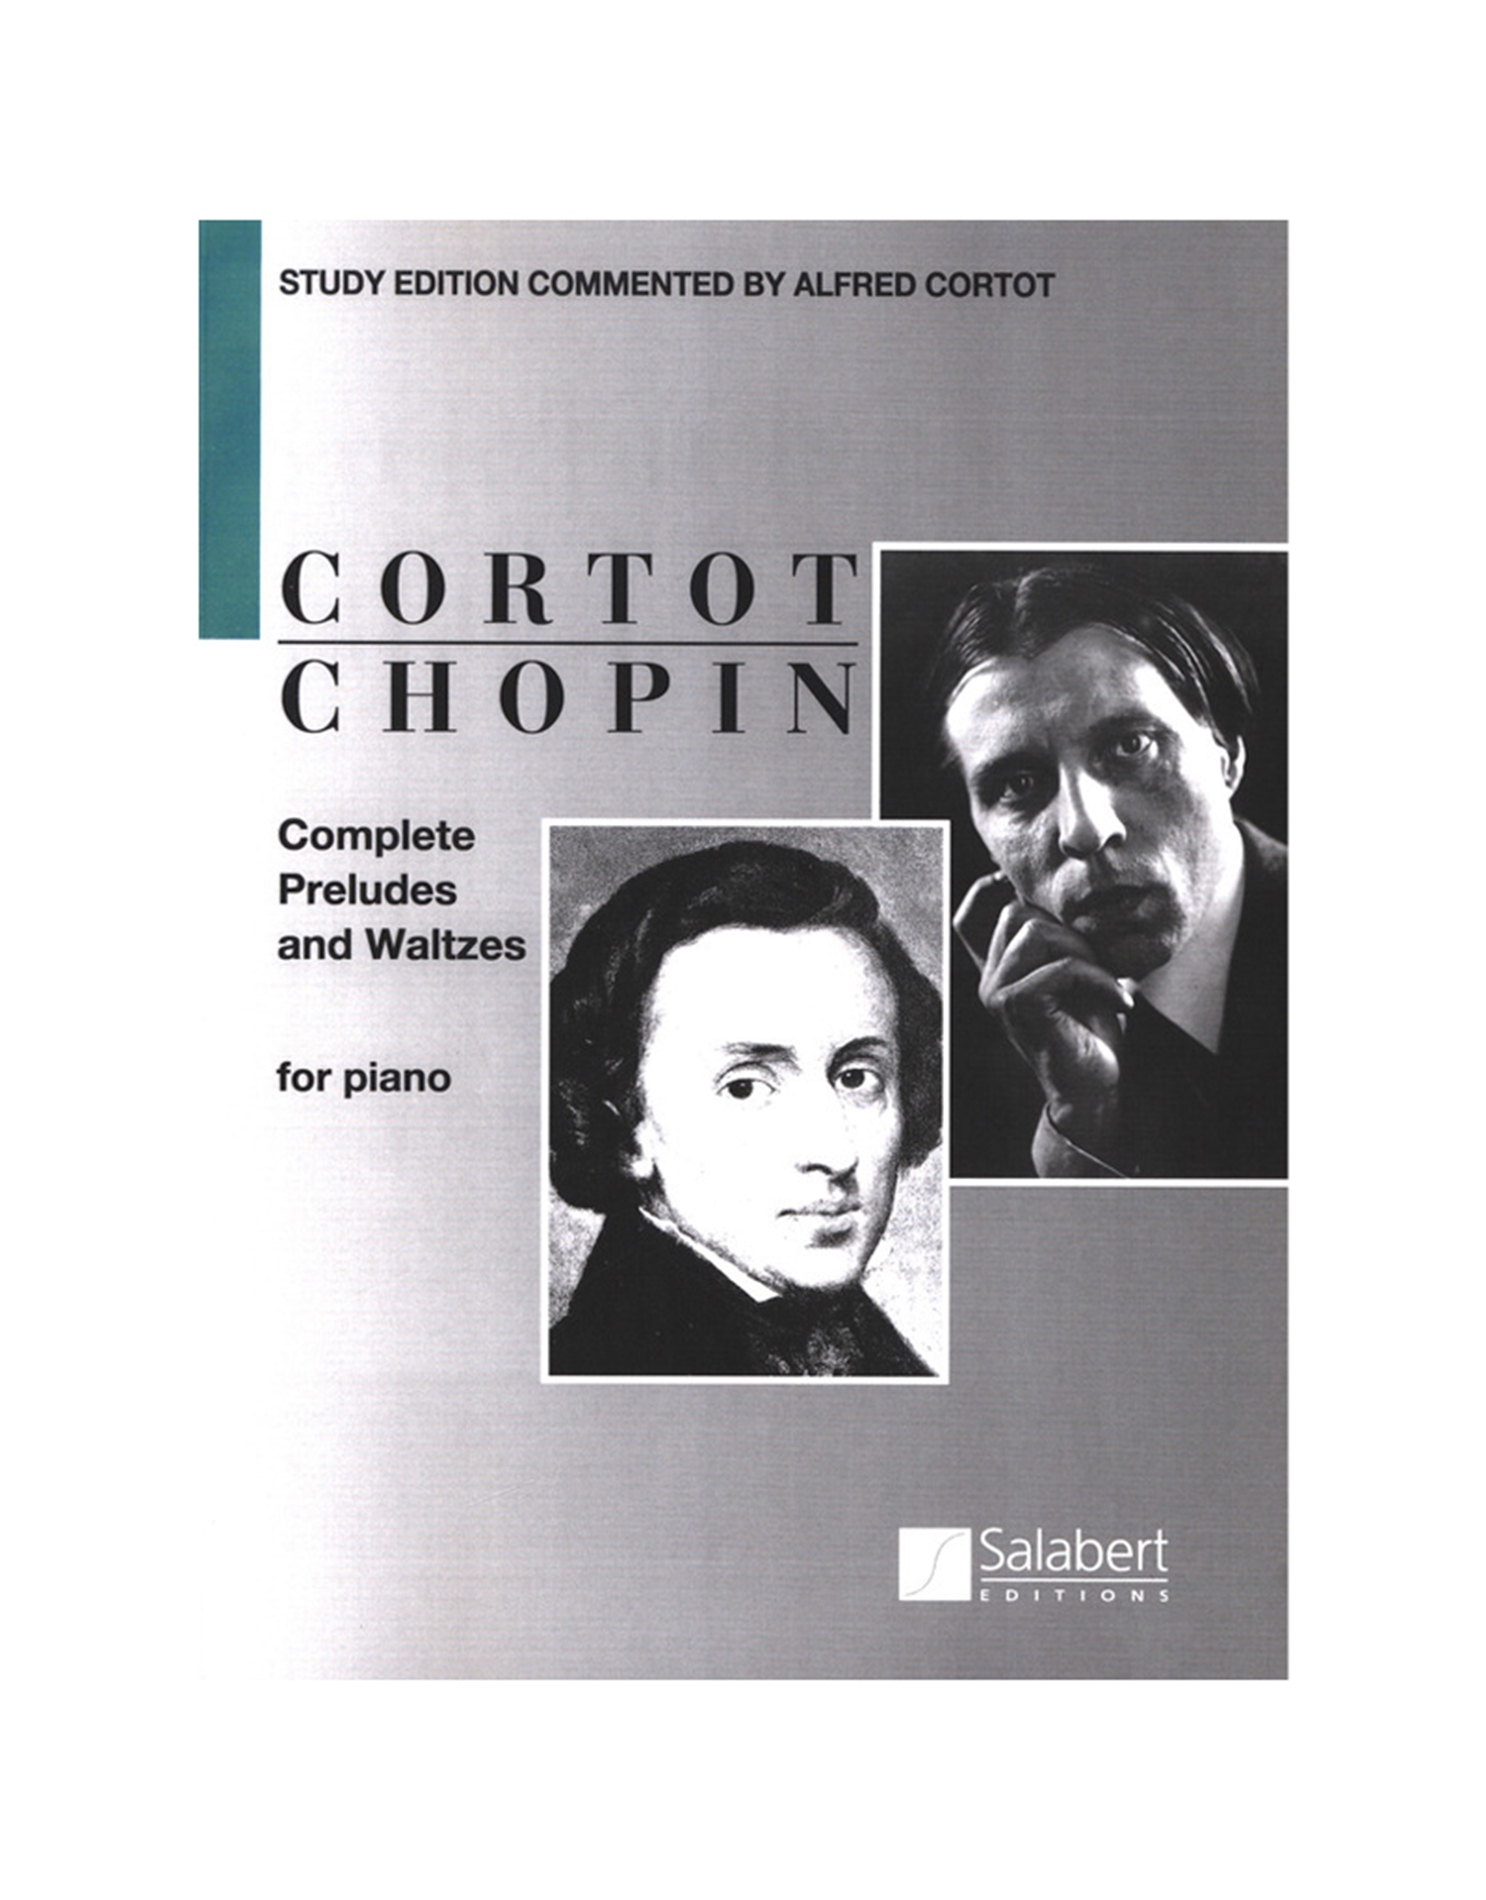 Music　Salabert　classic　Chopin-Complete　Preludes　Nakas　and　Waltzes　piano　Store